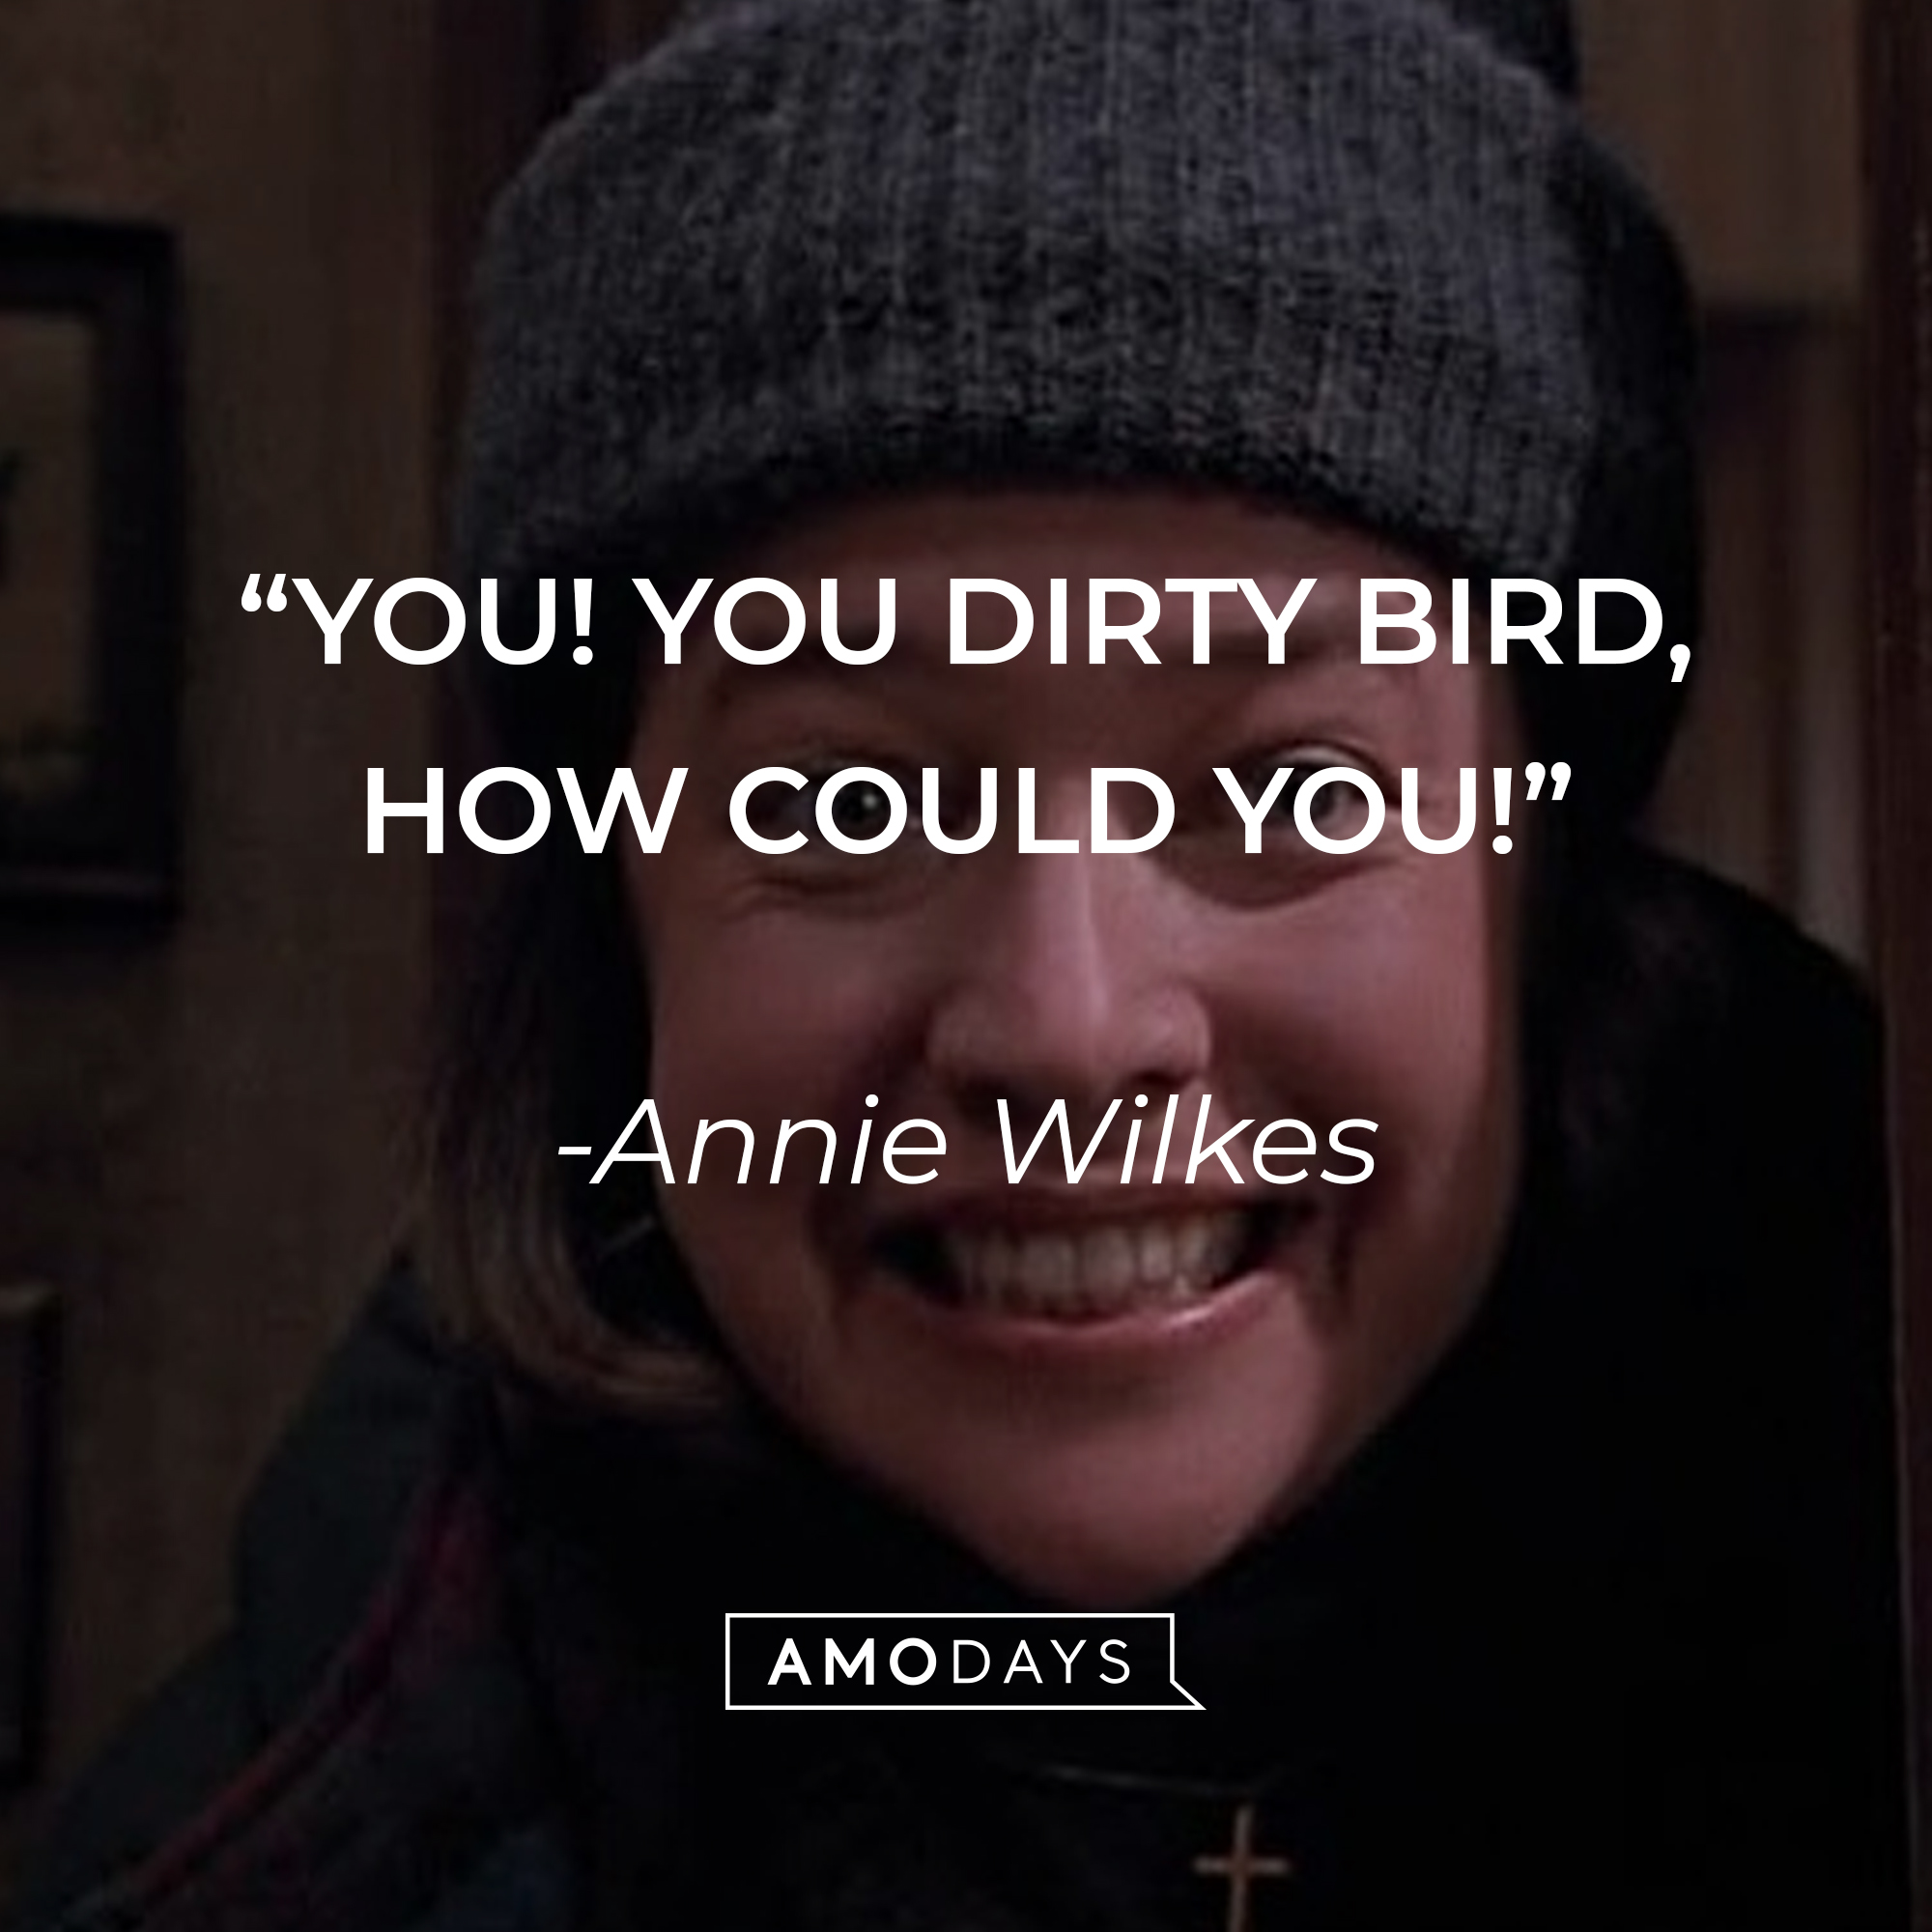 Annie Wilkes' quote: “YOU! YOU DIRTY BIRD, HOW COULD YOU!” | Source: facebook.com/MiseryMovie